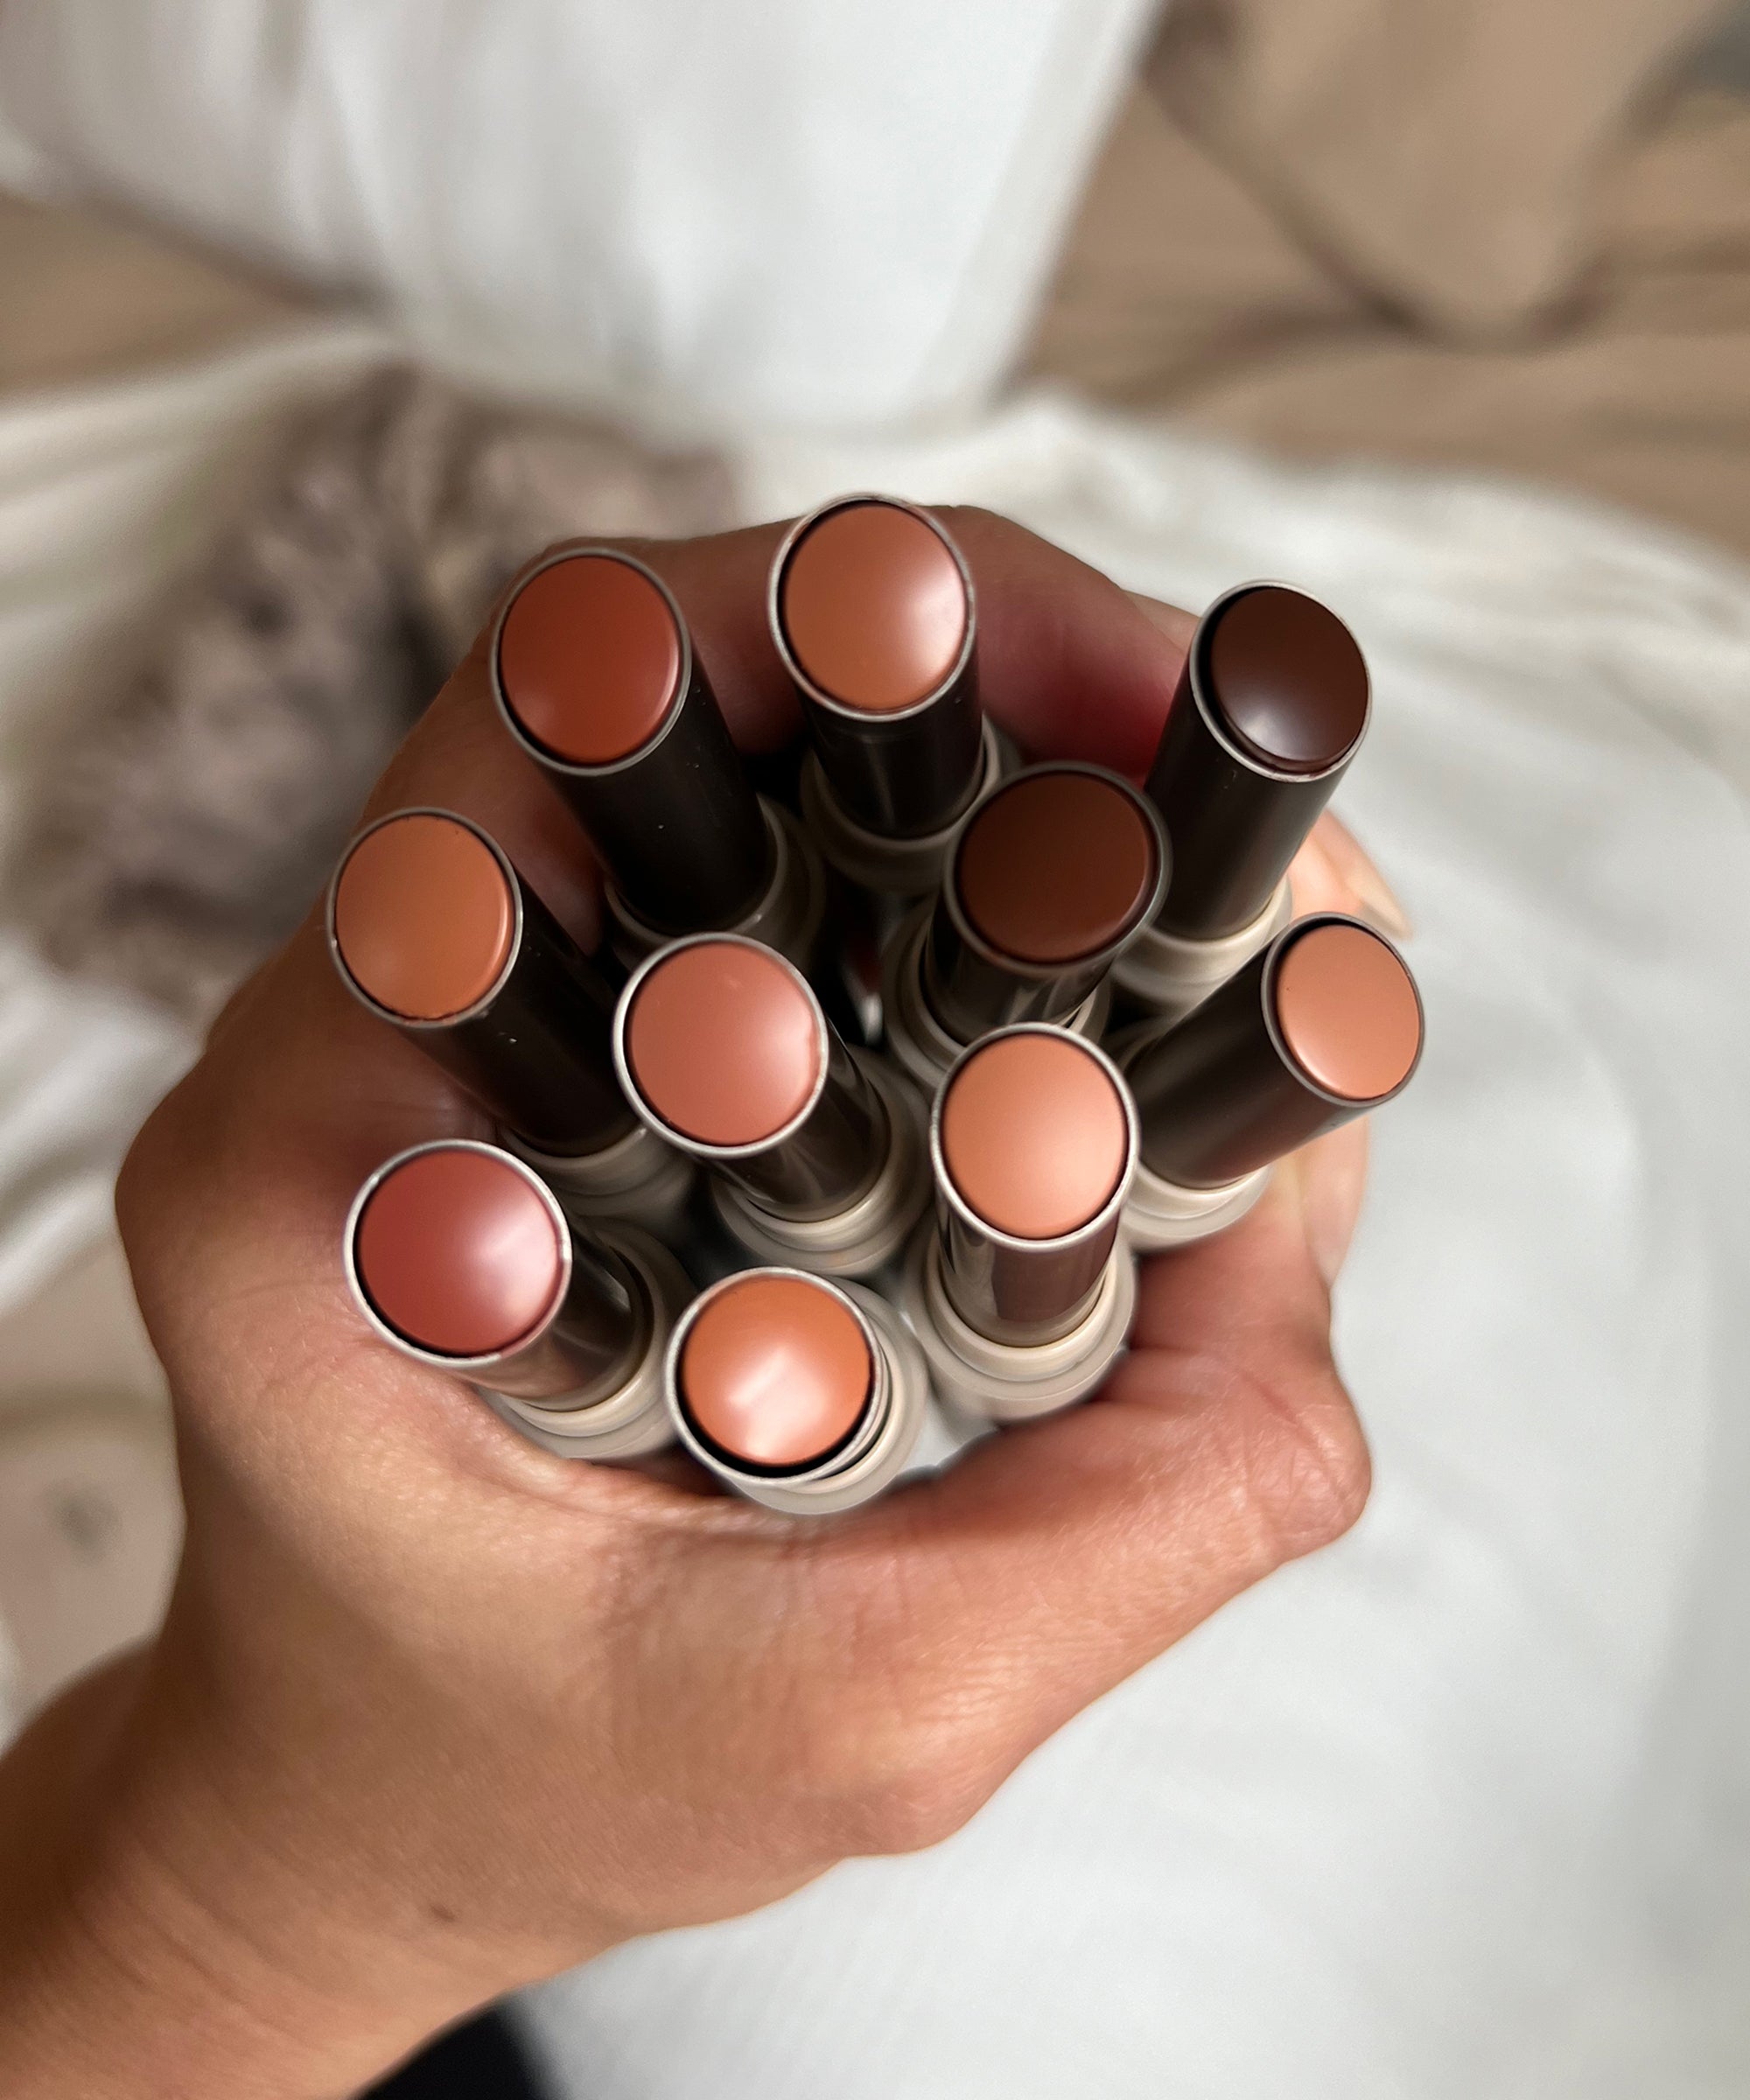 Back In Beige: The Neutral Lipstick Review